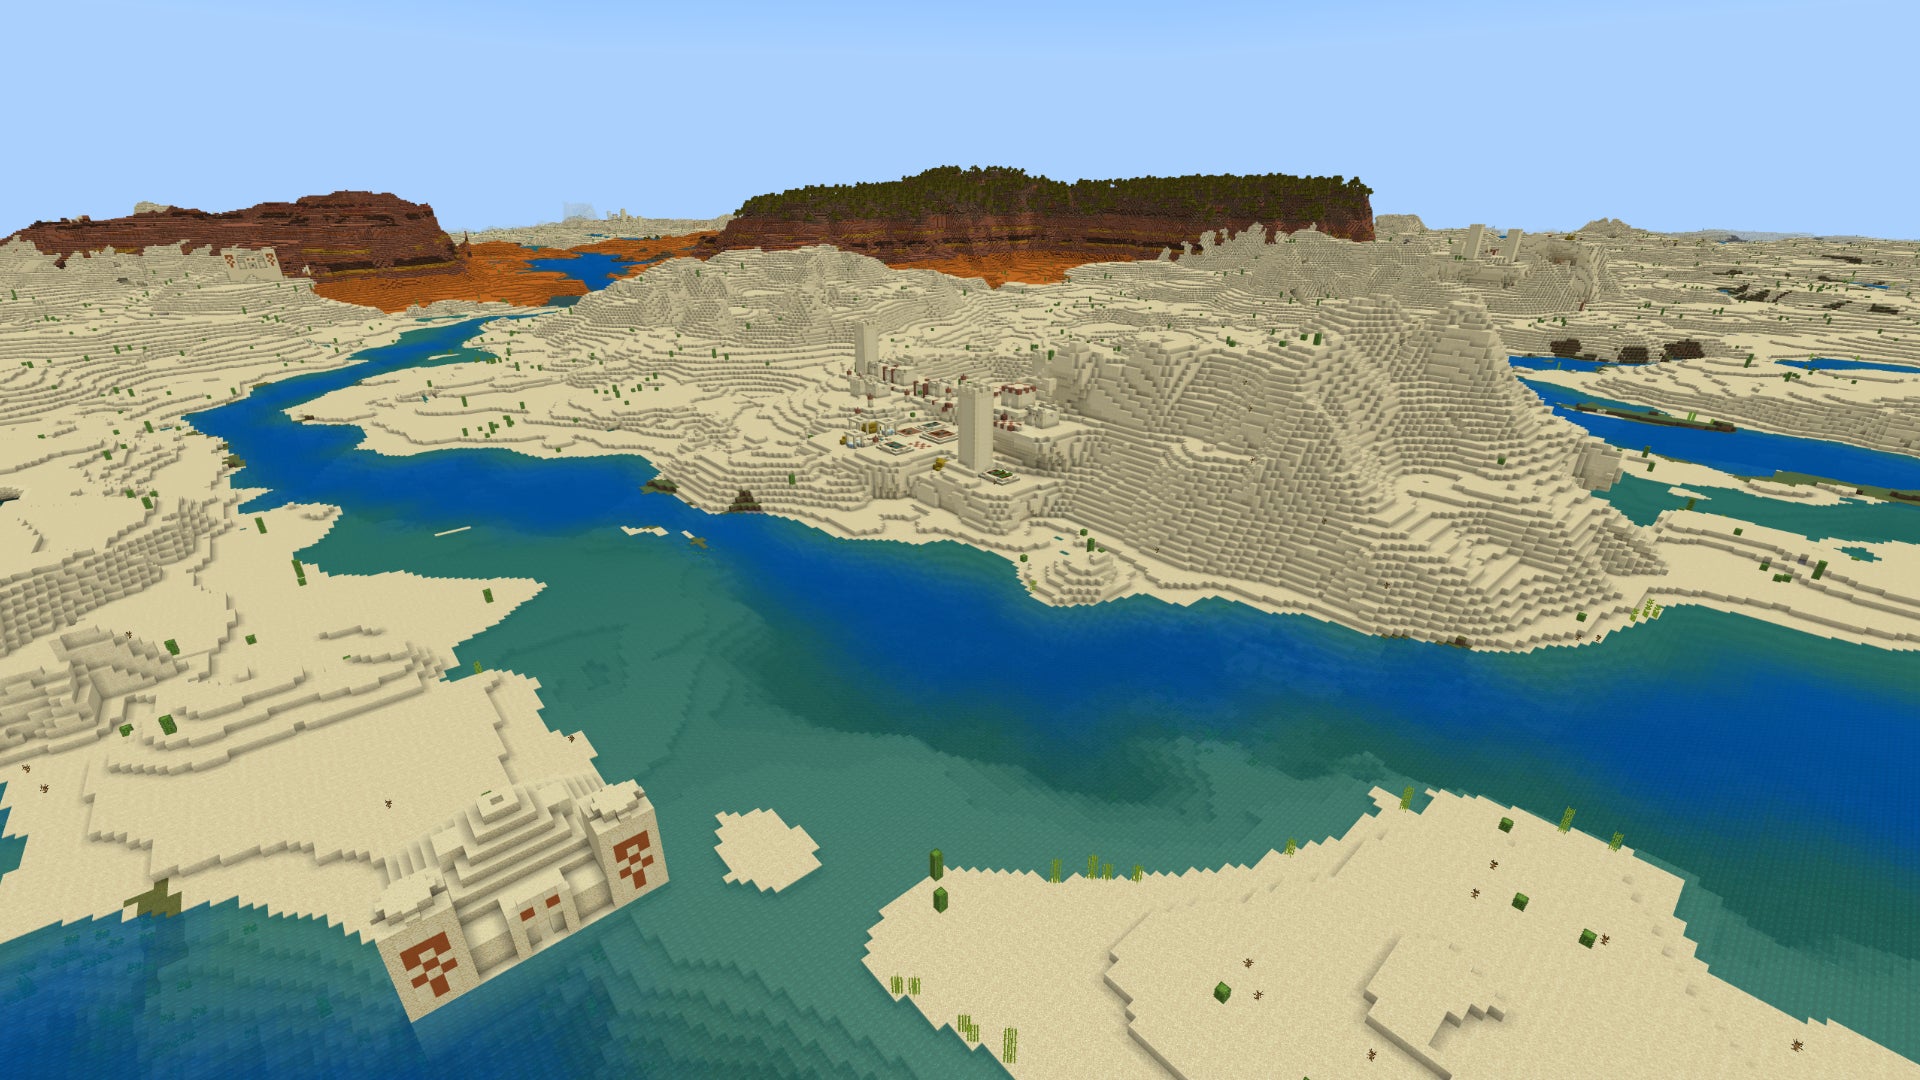 A Minecraft Bedrock landscape with desert and river in the foreground and badlands in the distance.